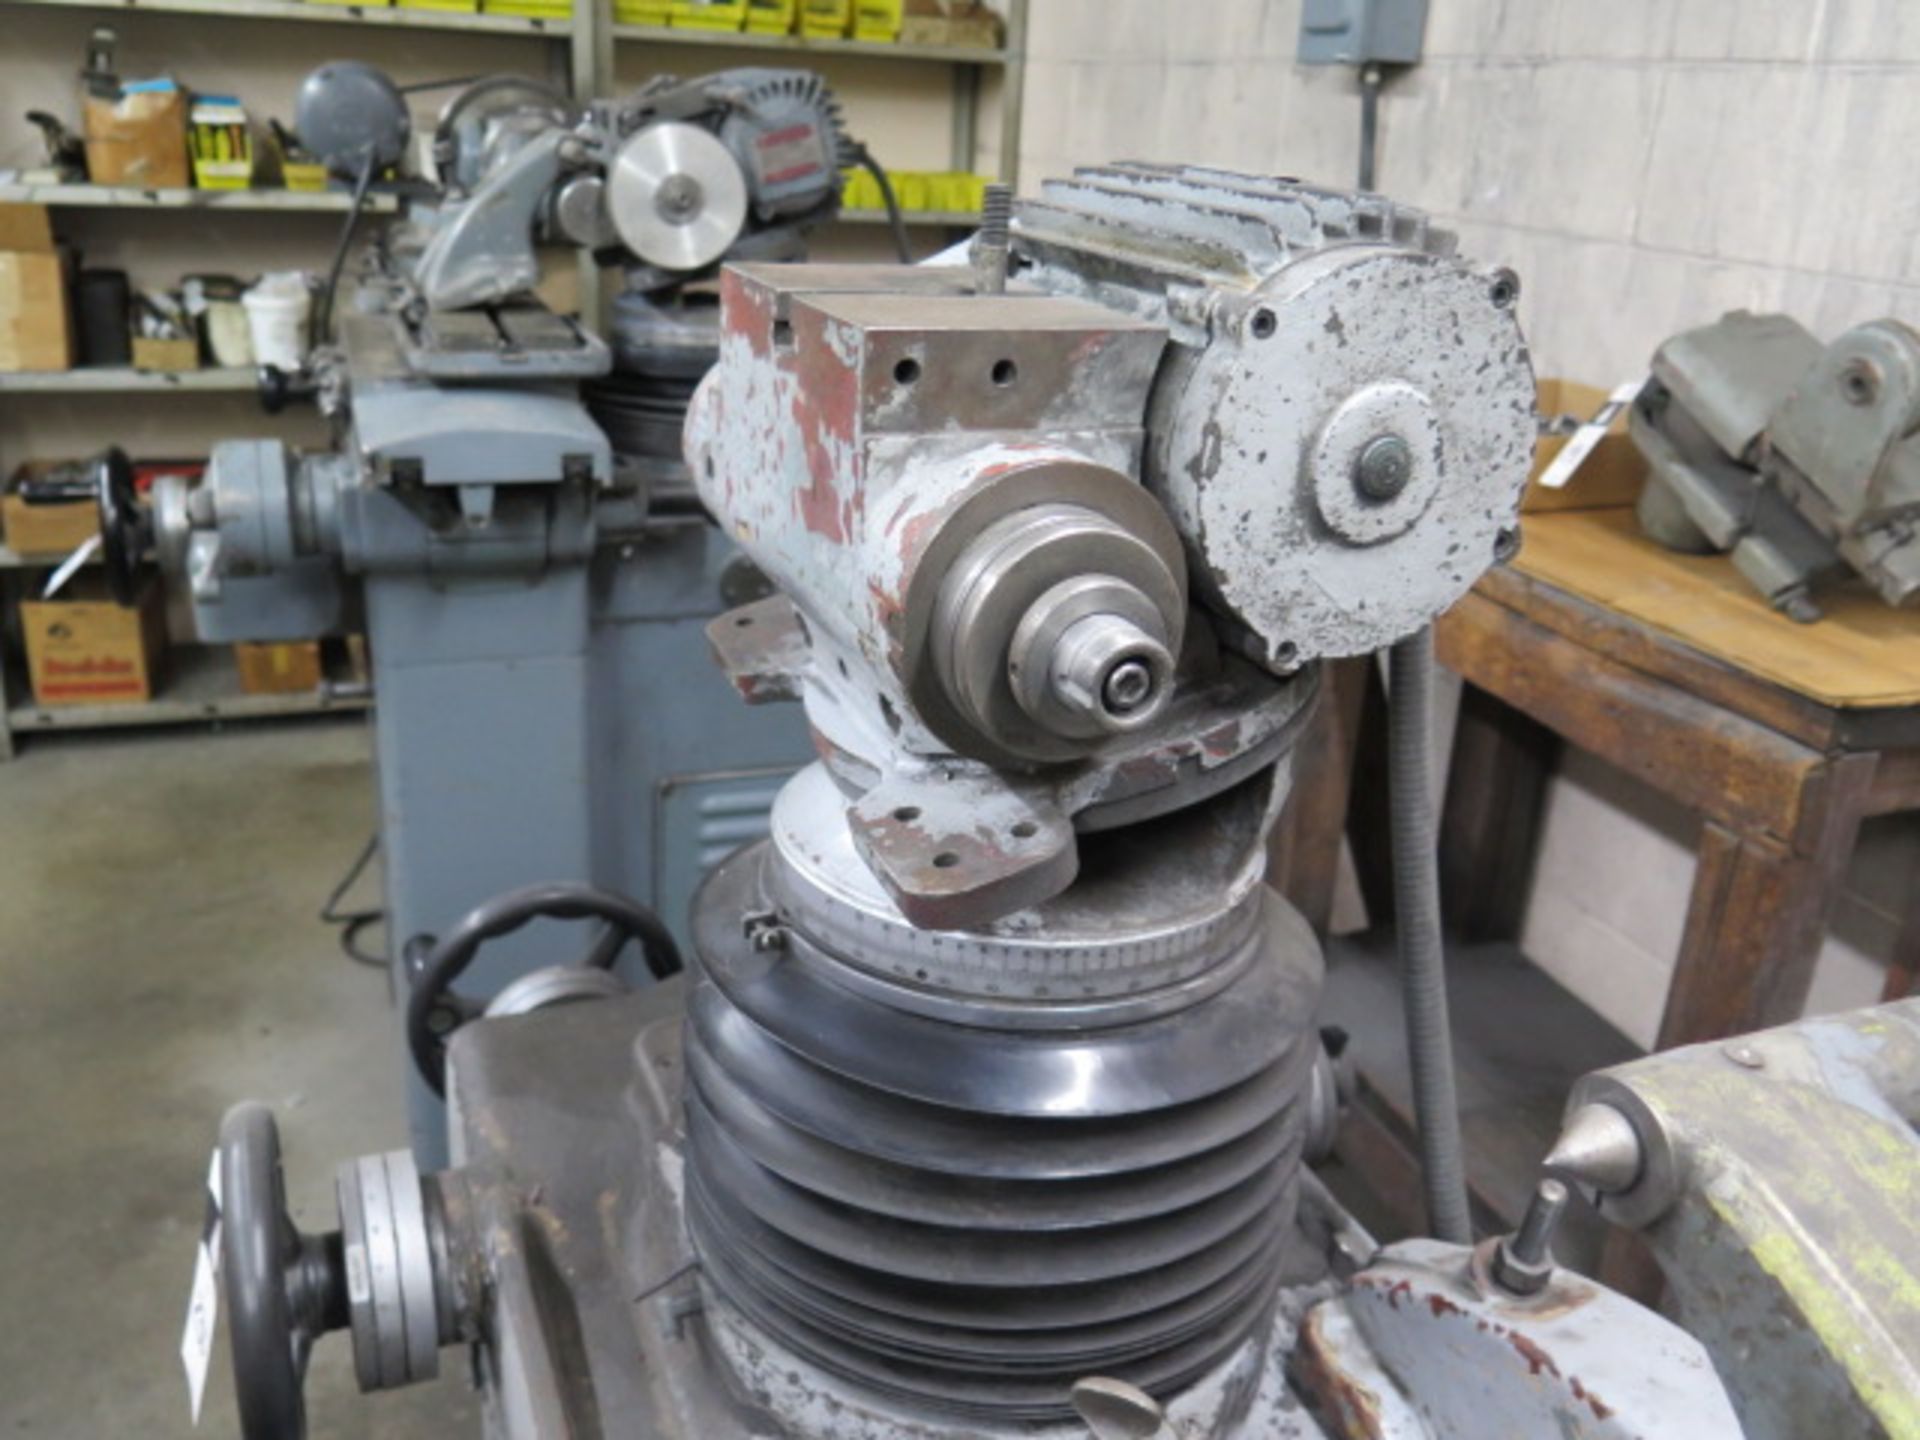 Jack Mill J-40 Tool and Cutter Grinder s/n J-10871 w/ Motorized Work Head, Centers, 5C SOLD AS IS - Image 5 of 10